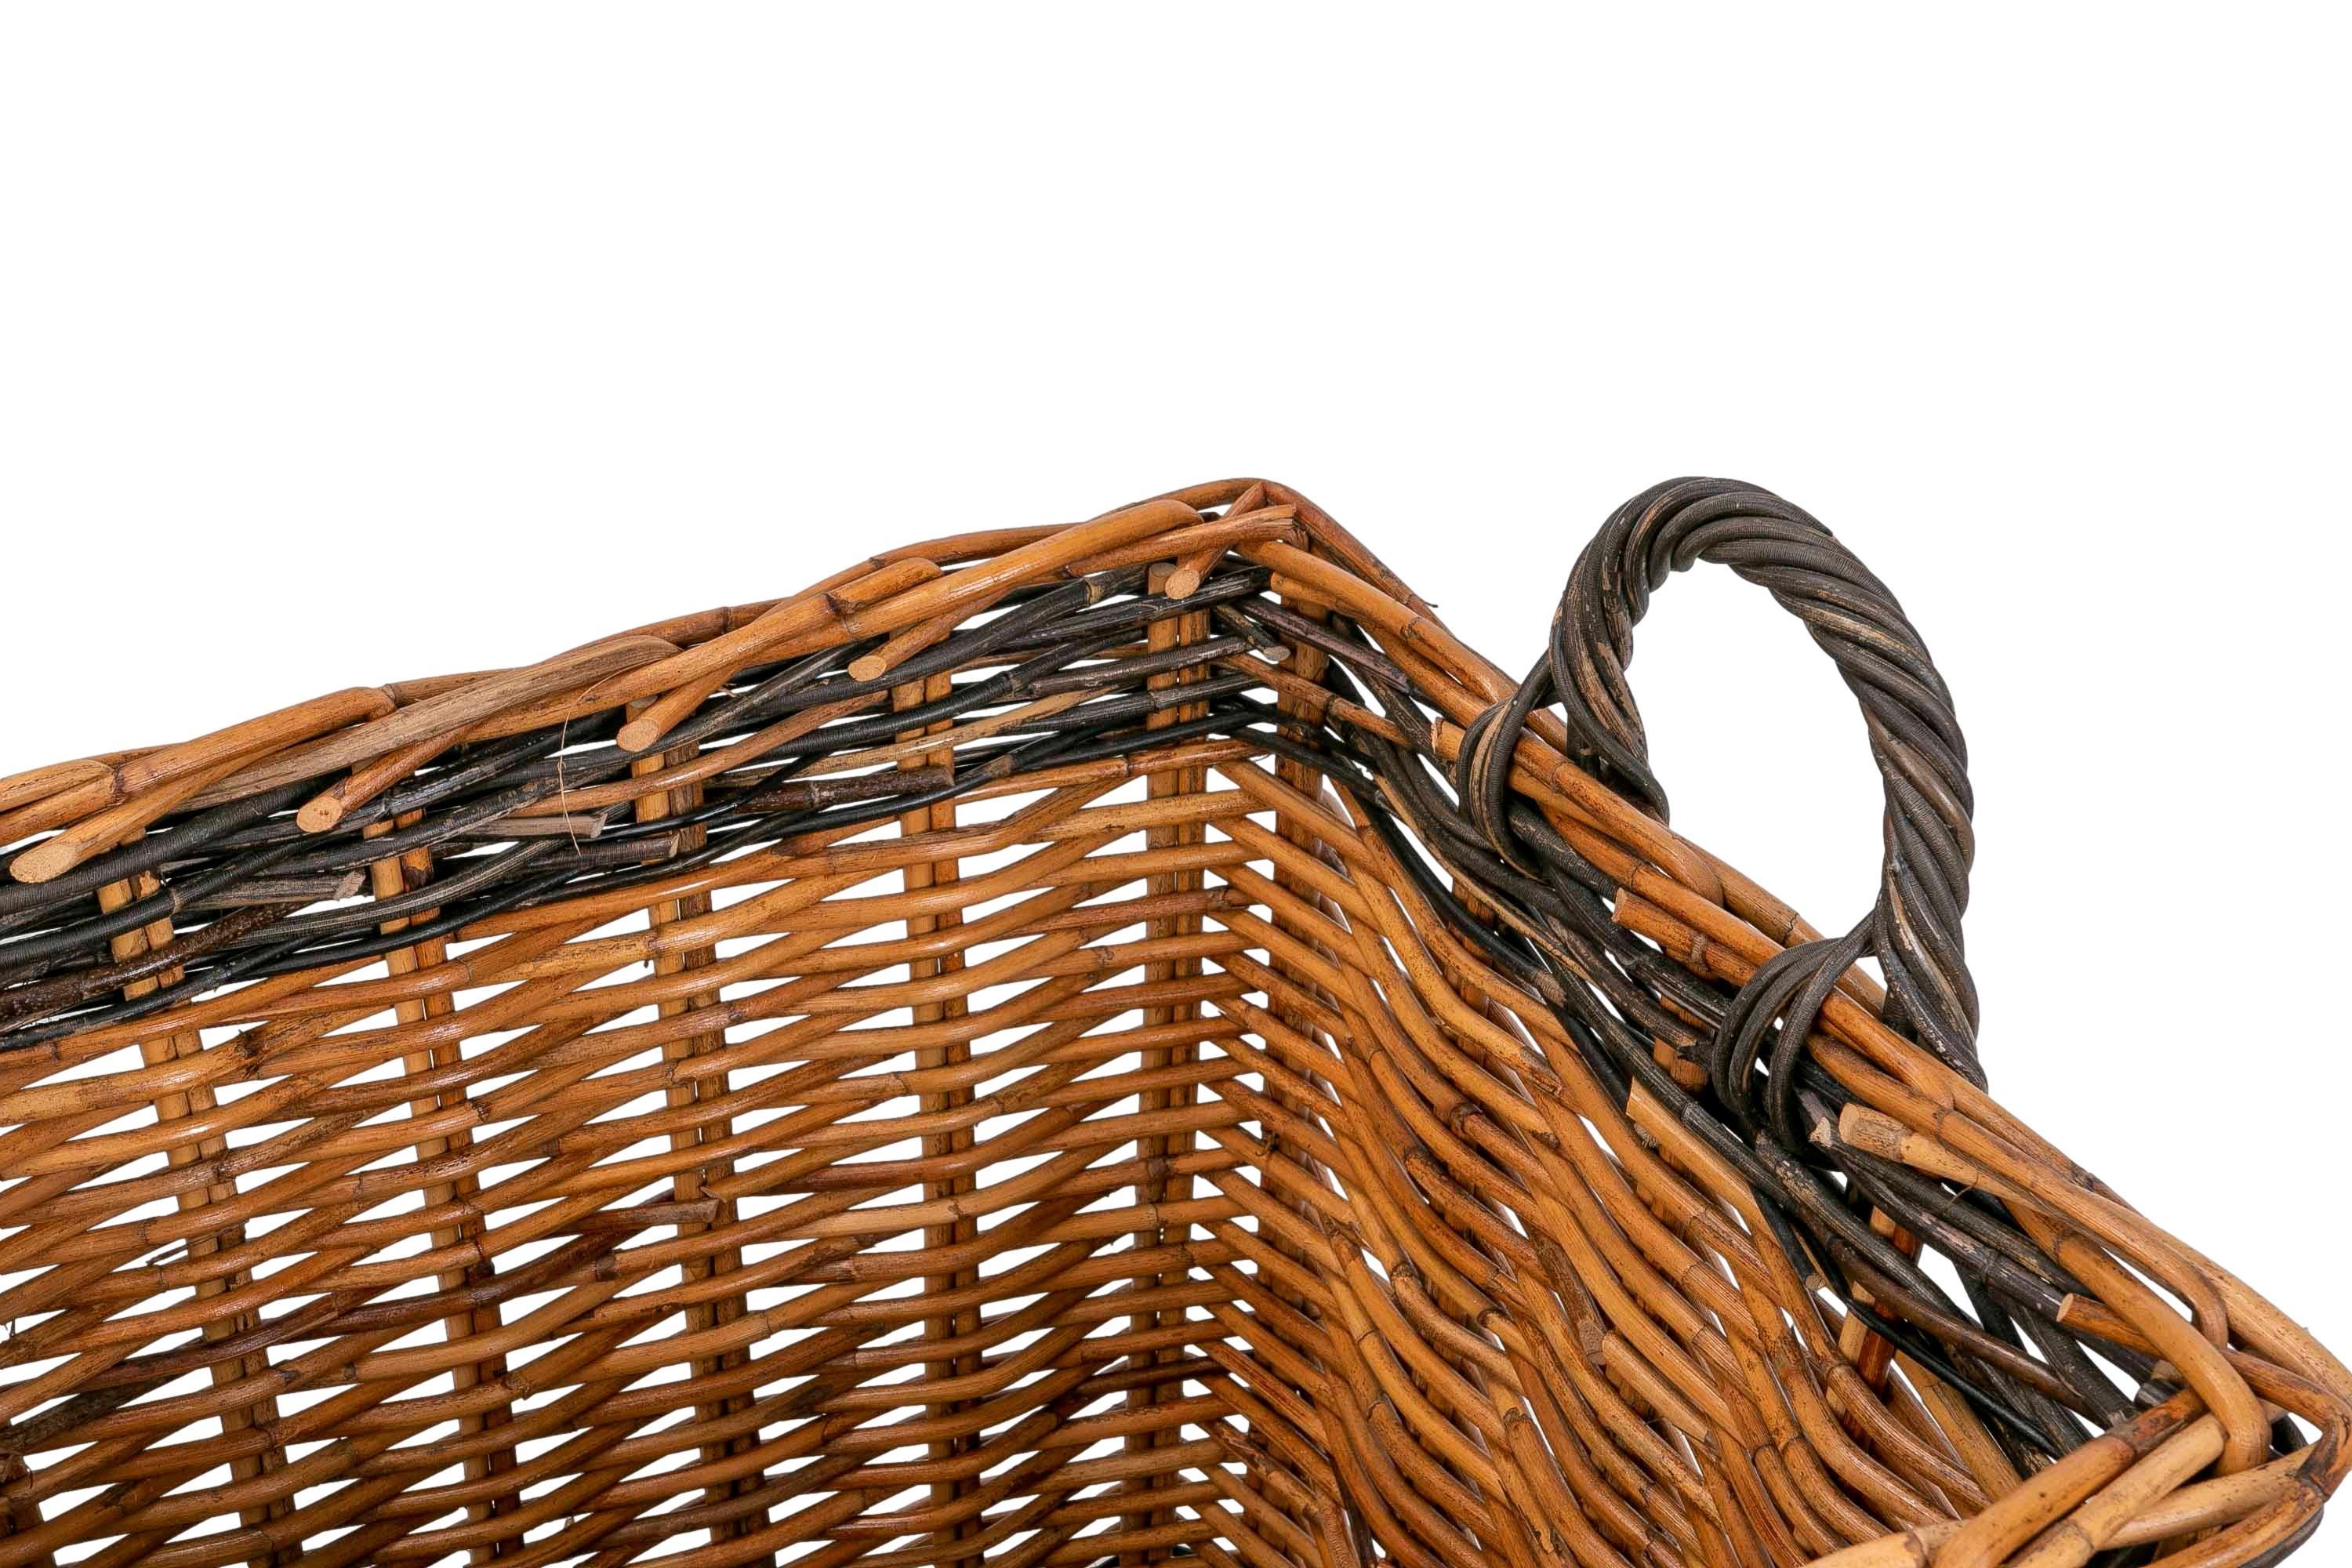 Set Consisting of Three Decorative Wicker Baskets of Different Sizes For Sale 3